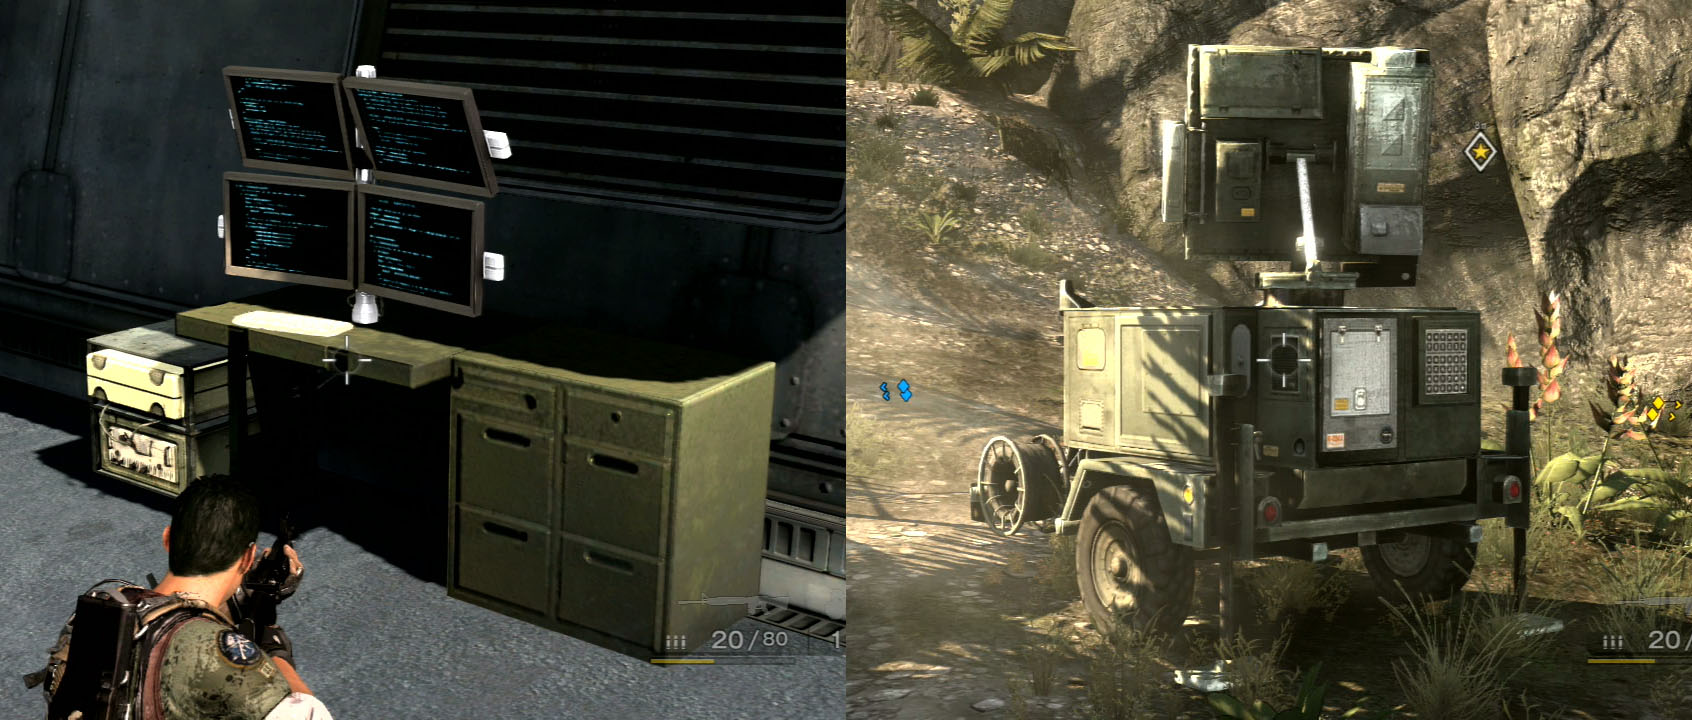 The new terminal asset on the left just didn't make a lot of sense outside
 so I chose the asset on the right to take its place in all of my Espionage missions